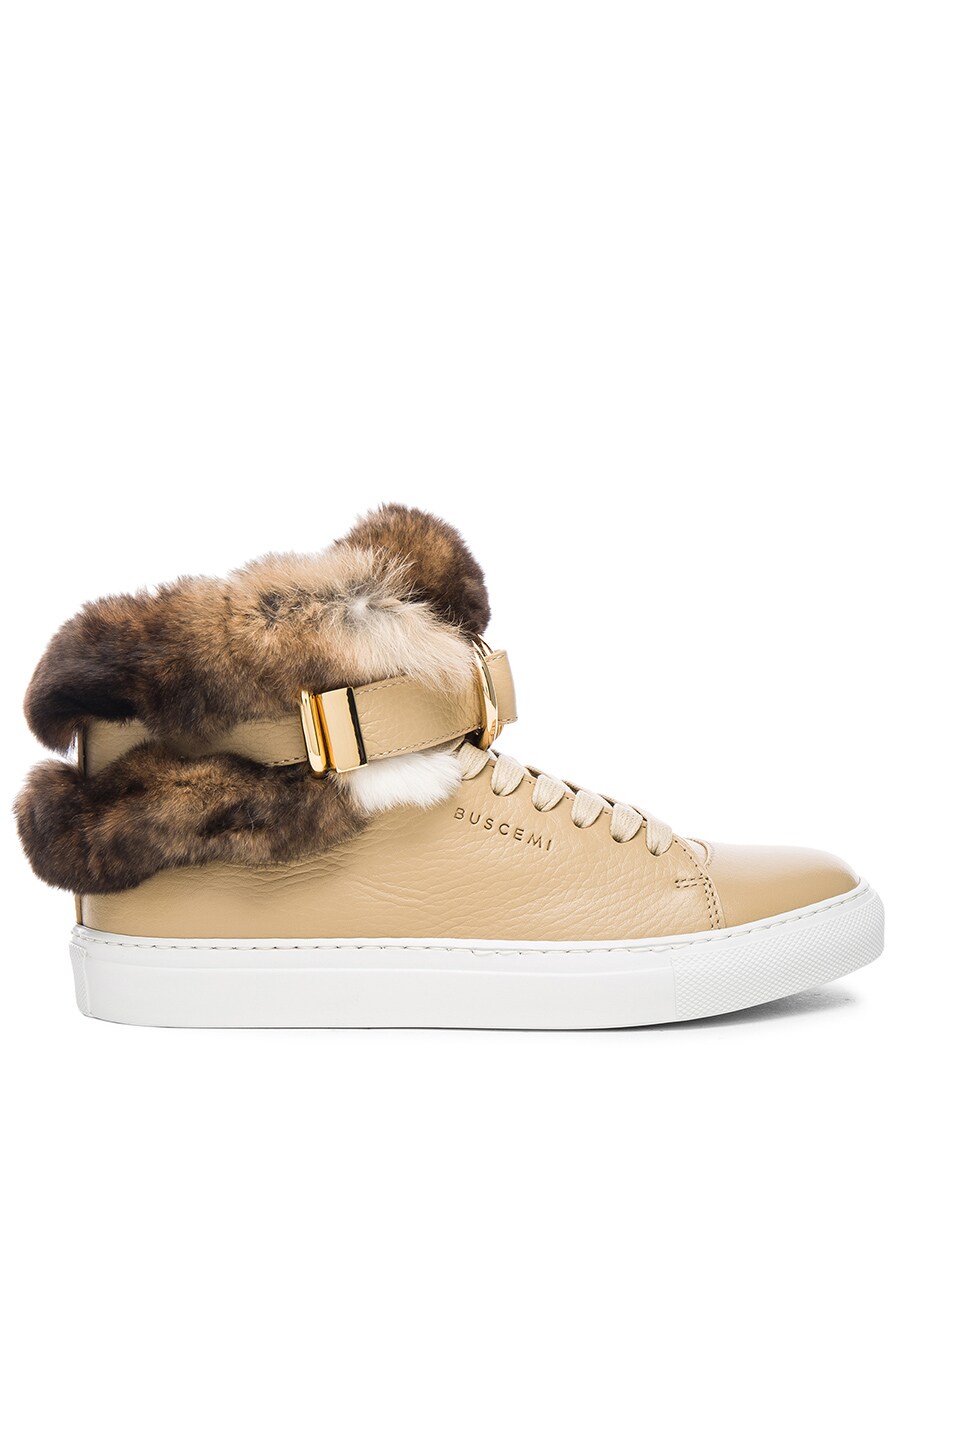 Image 1 of Buscemi 100MM Leather Sneakers with Rabbit Fur in Ivory